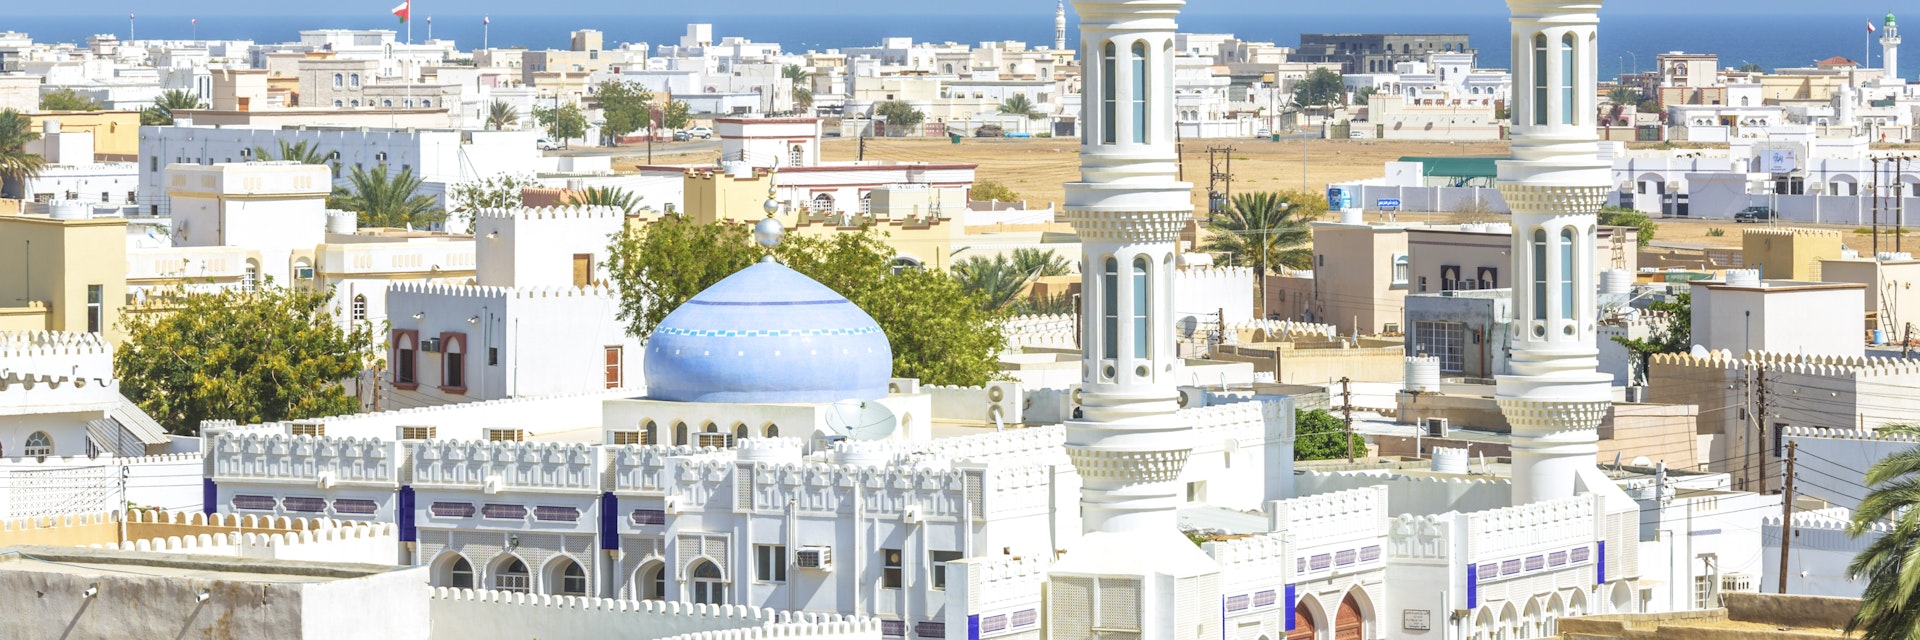 Oman, Sur, Cityscape with mosque in foreground